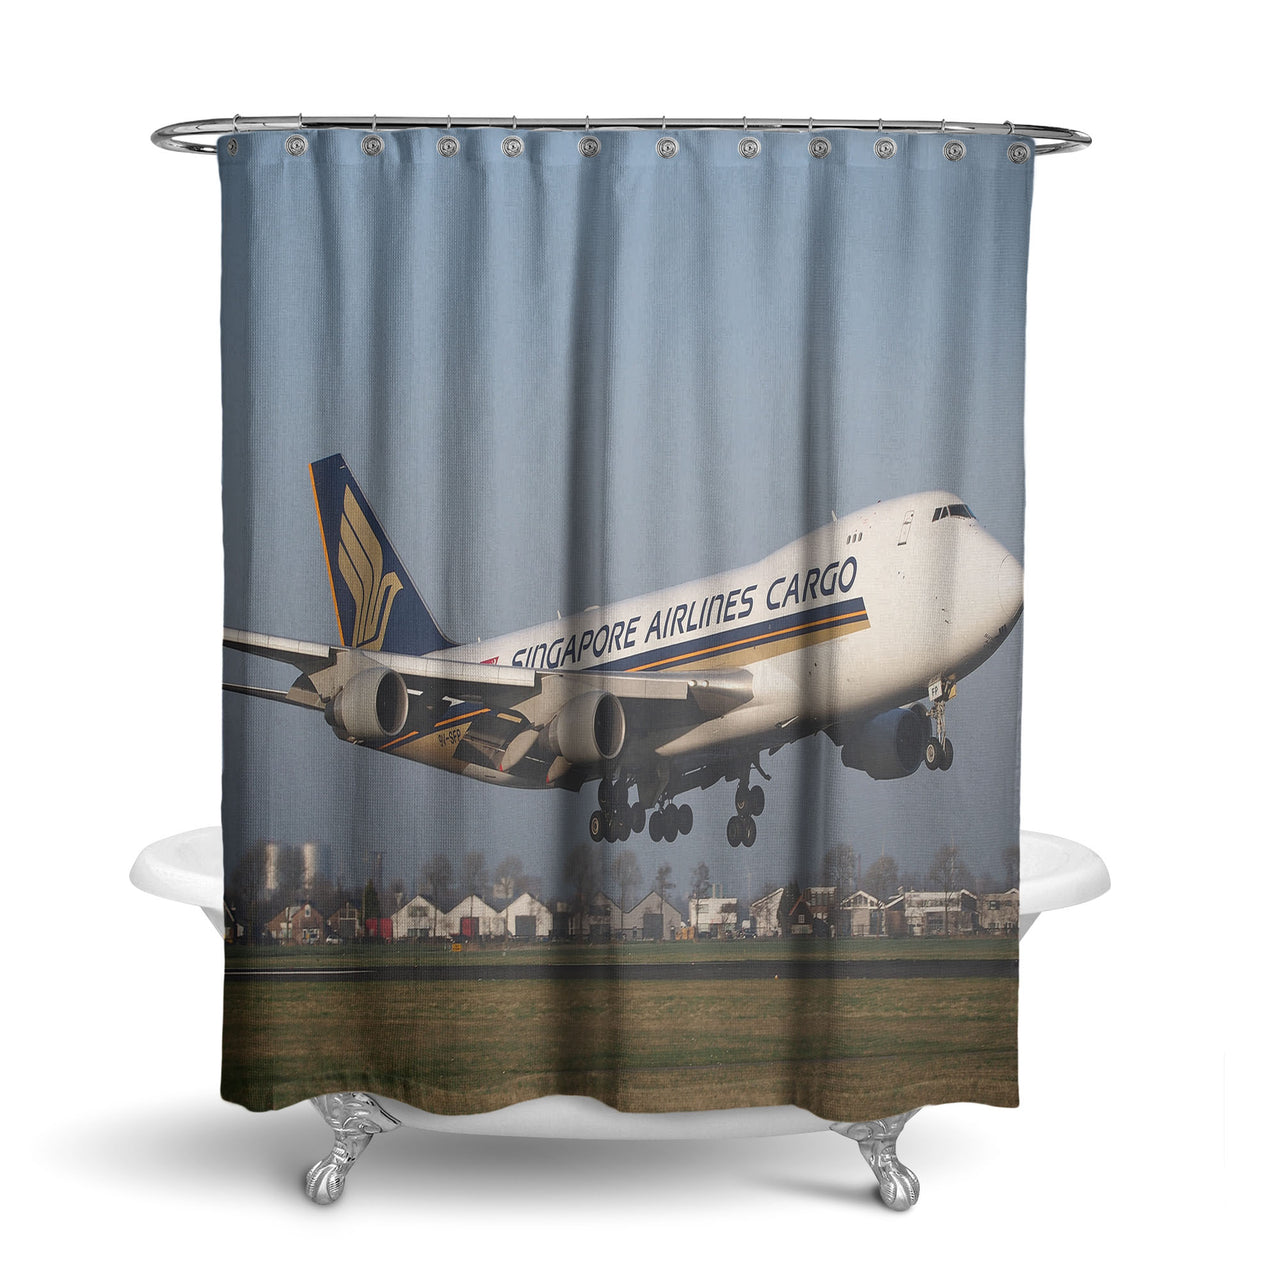 Singapore Airlines Cargo Boeing 747 Designed Shower Curtains